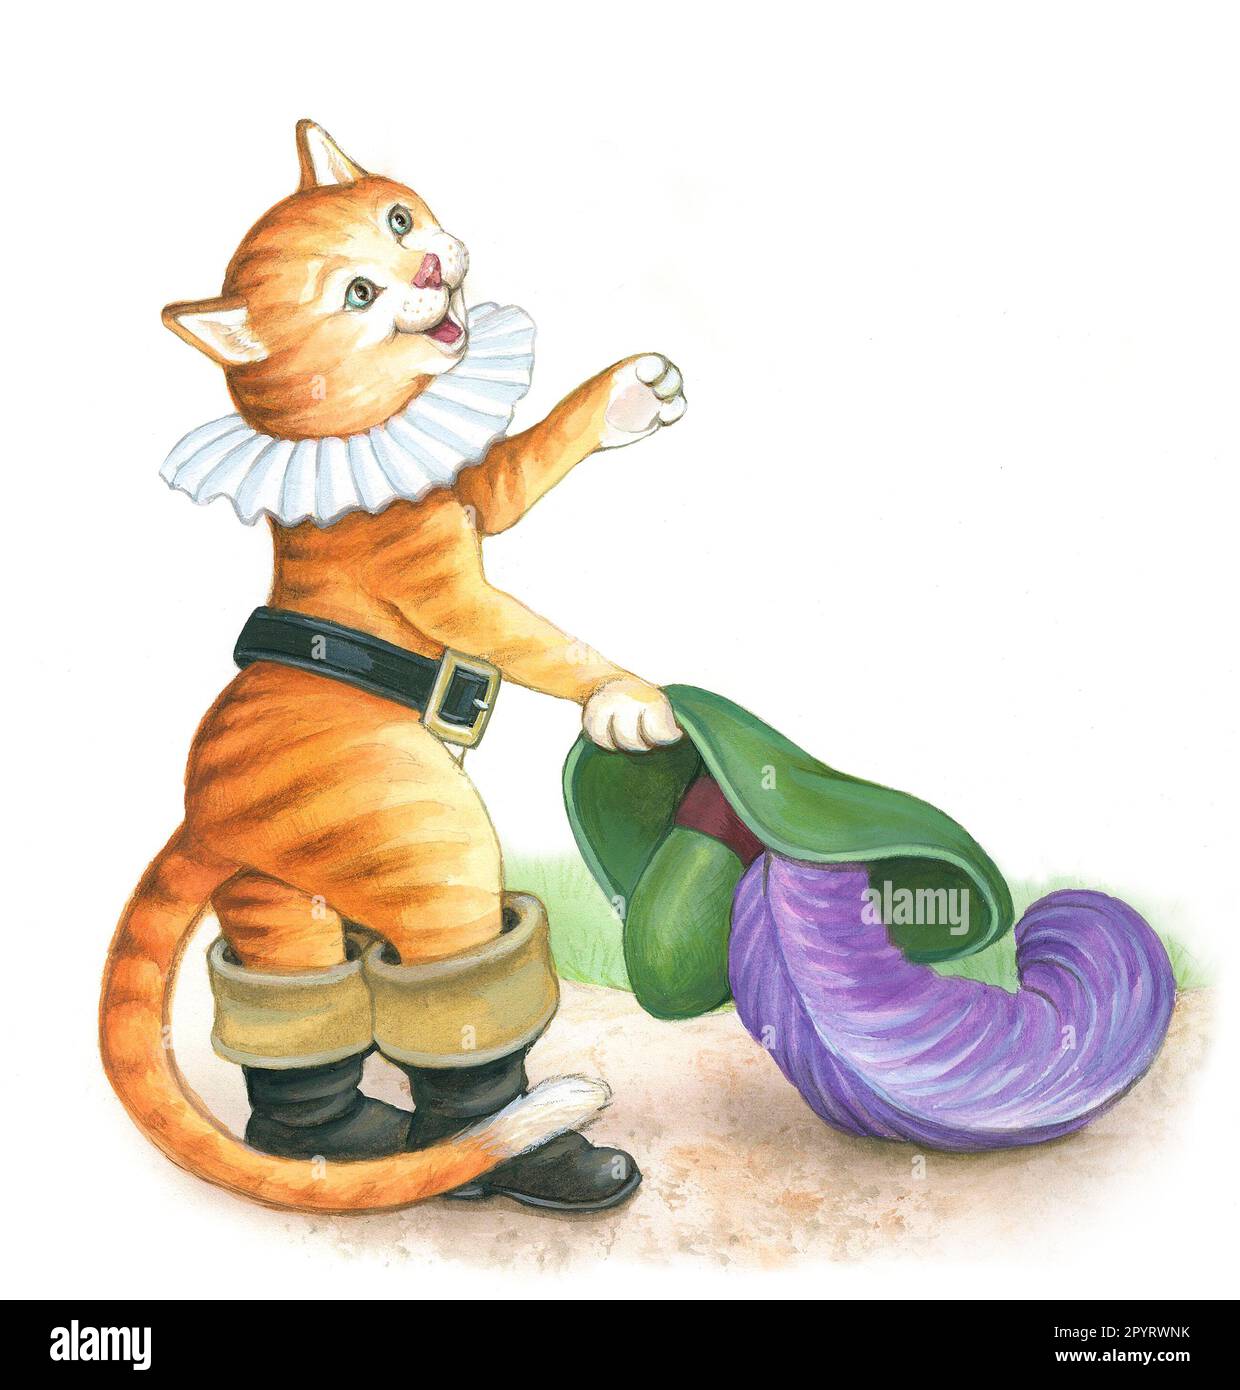 Children's stories--Puss in Boots with plume hat Stock Photo